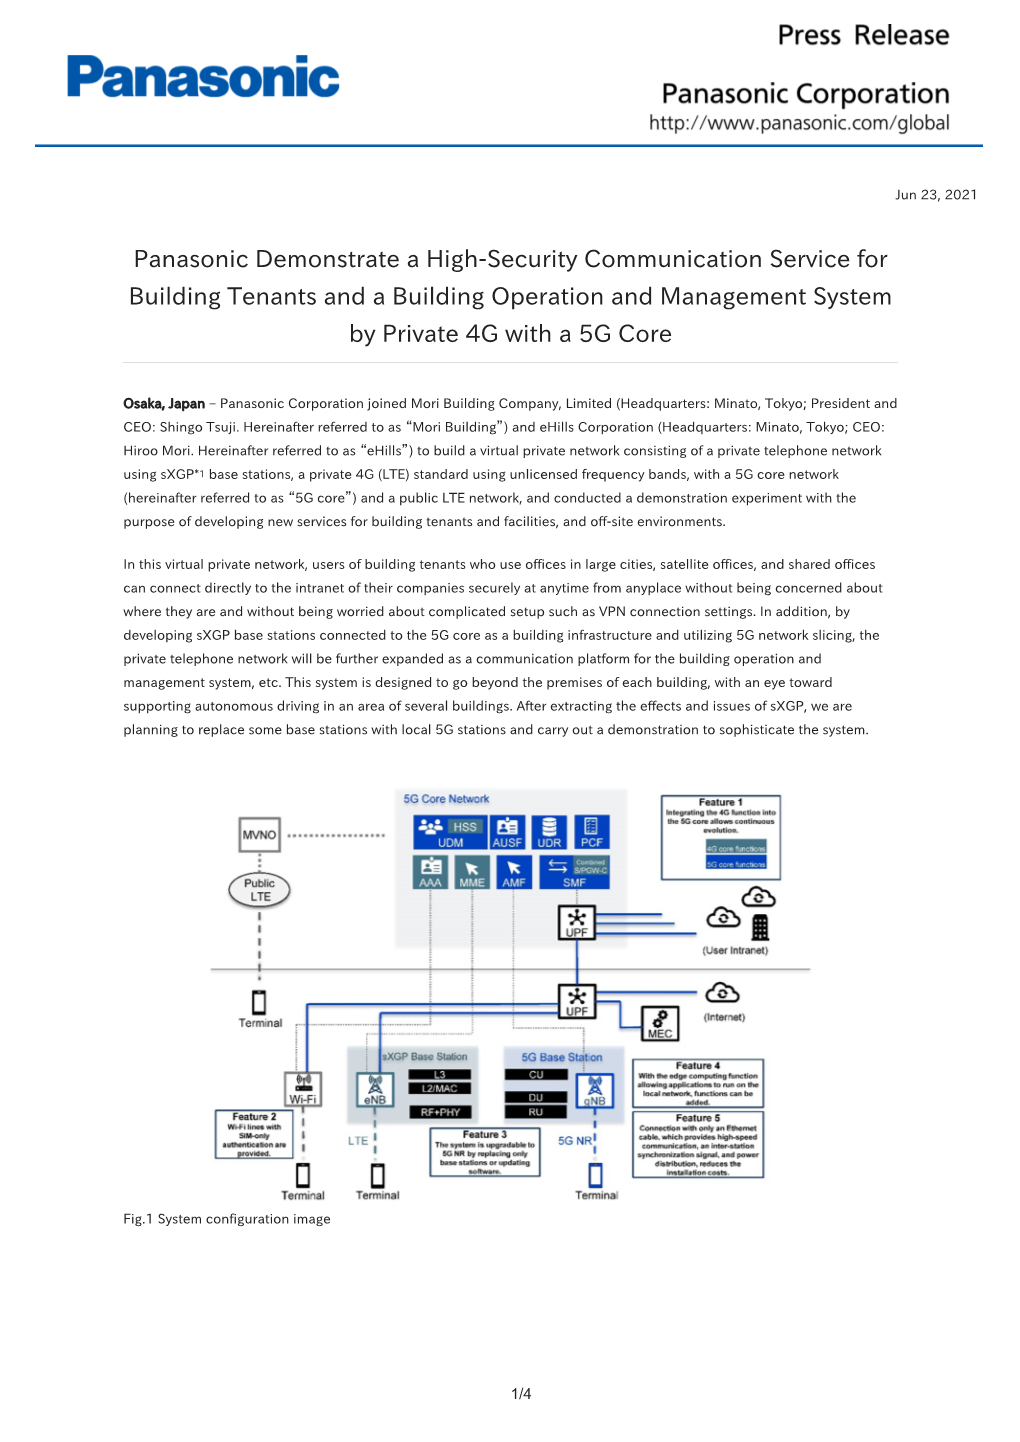 Panasonic Demonstrate a High-Security Communication Service for Building Tenants and a Building Operation and Management System by Private 4G with a 5G Core